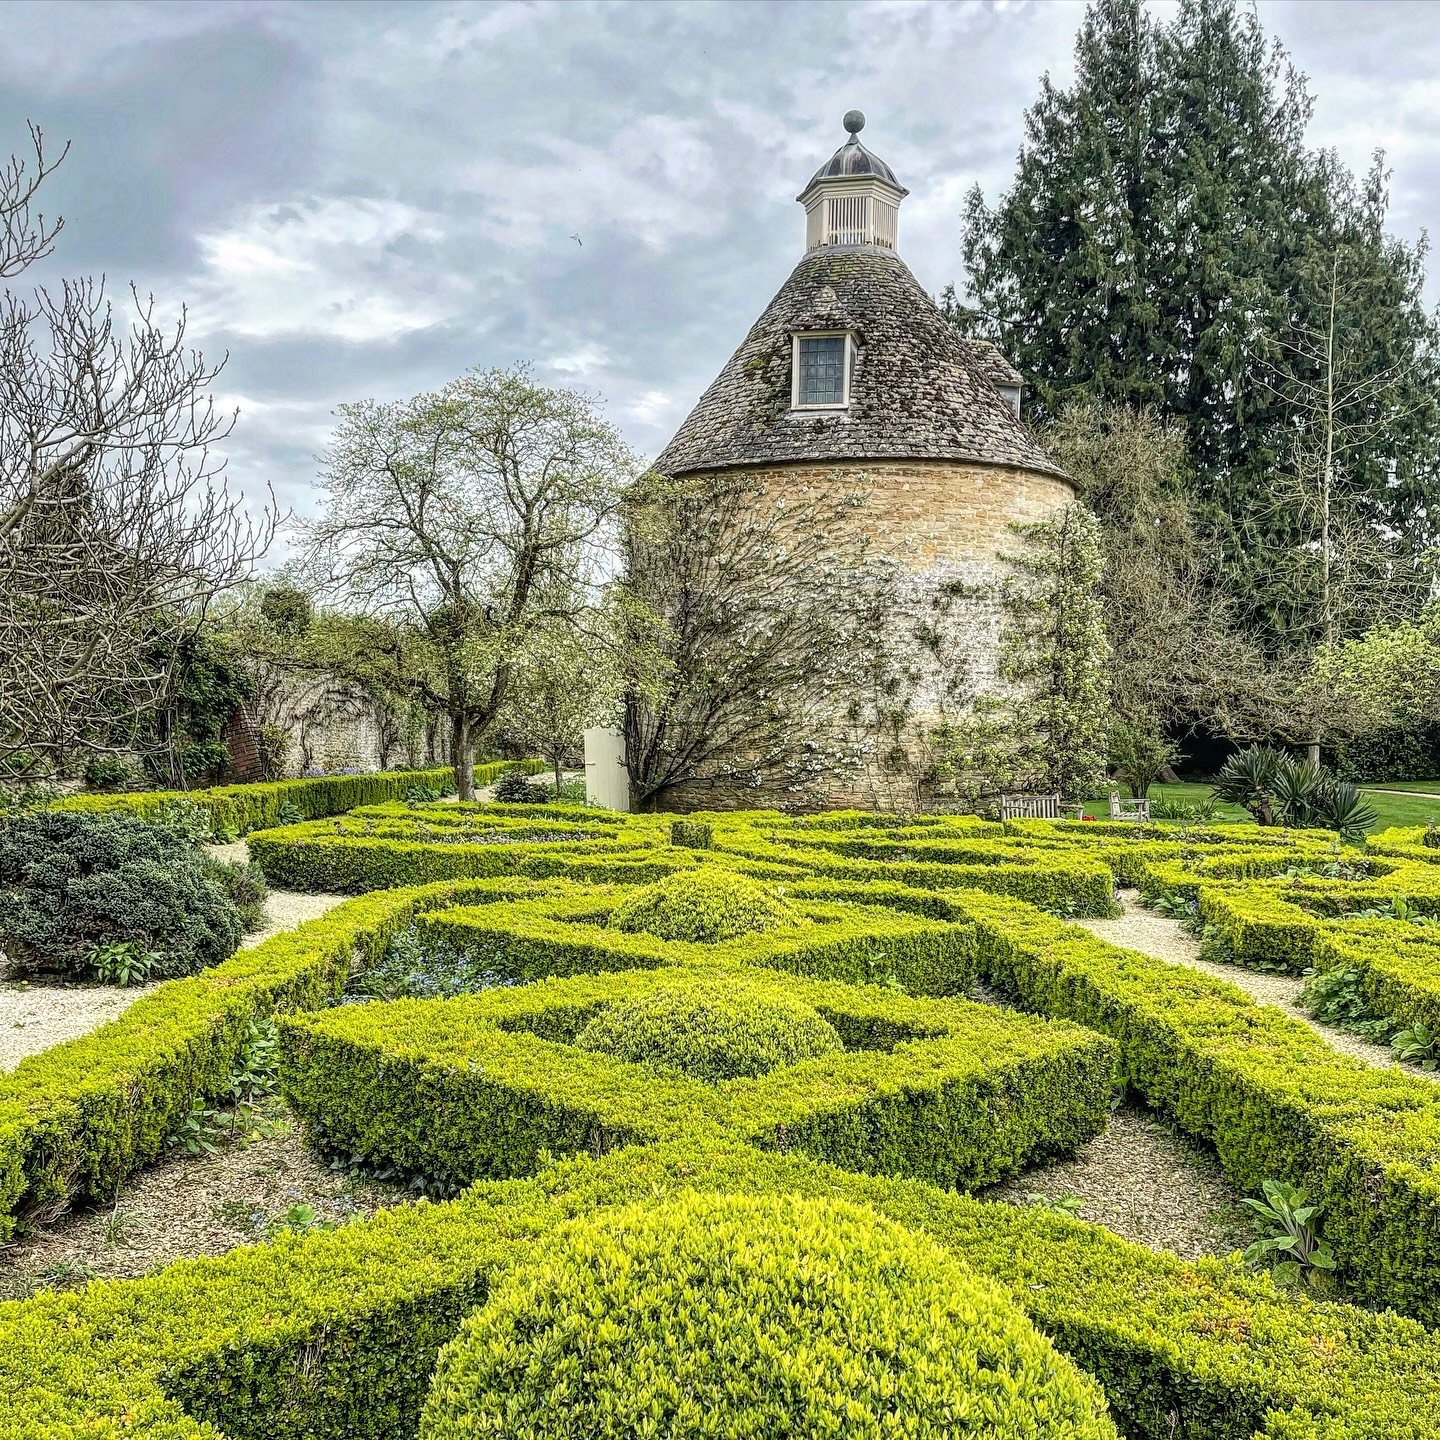 Spring visit to Rousham.  Absolutely beautiful and in a week&rsquo;s time the Apple blossom will be stunning. The care and attention given to the trained fruit trees is so inspiring, especially the cherry around this incredible dovecote. What a beaut